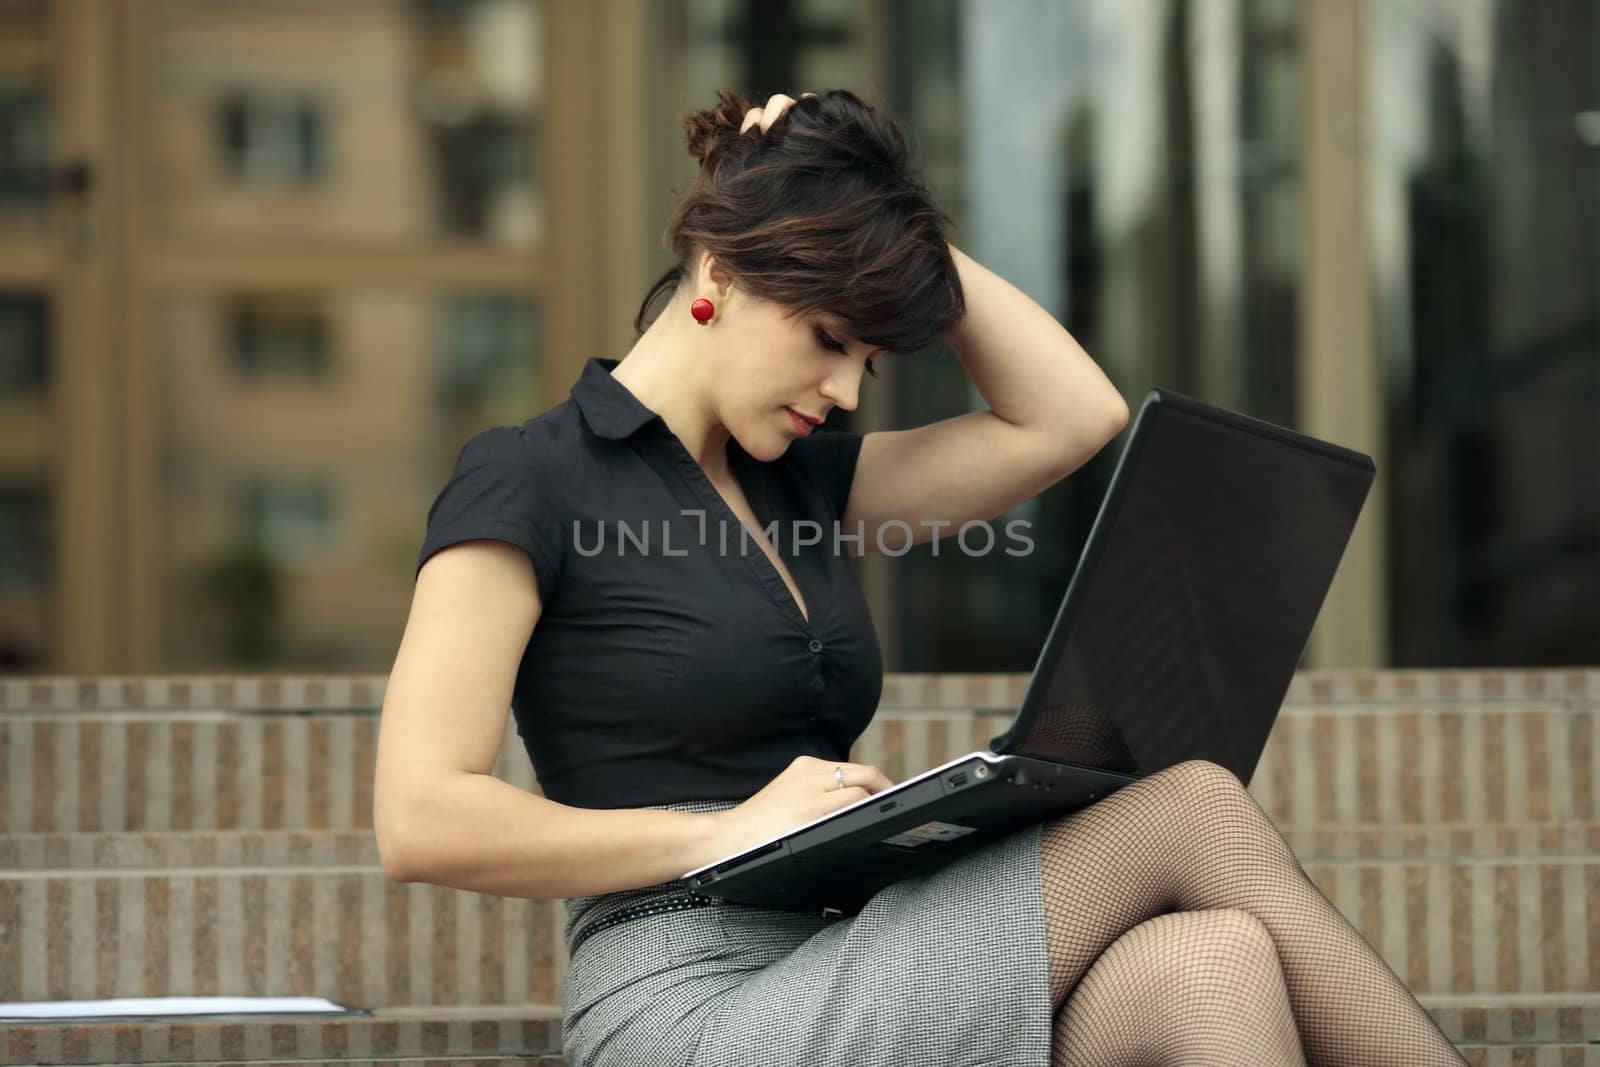 busy young attractive lady playing with her hair and looking at a laptop on the stairs in front of an office building